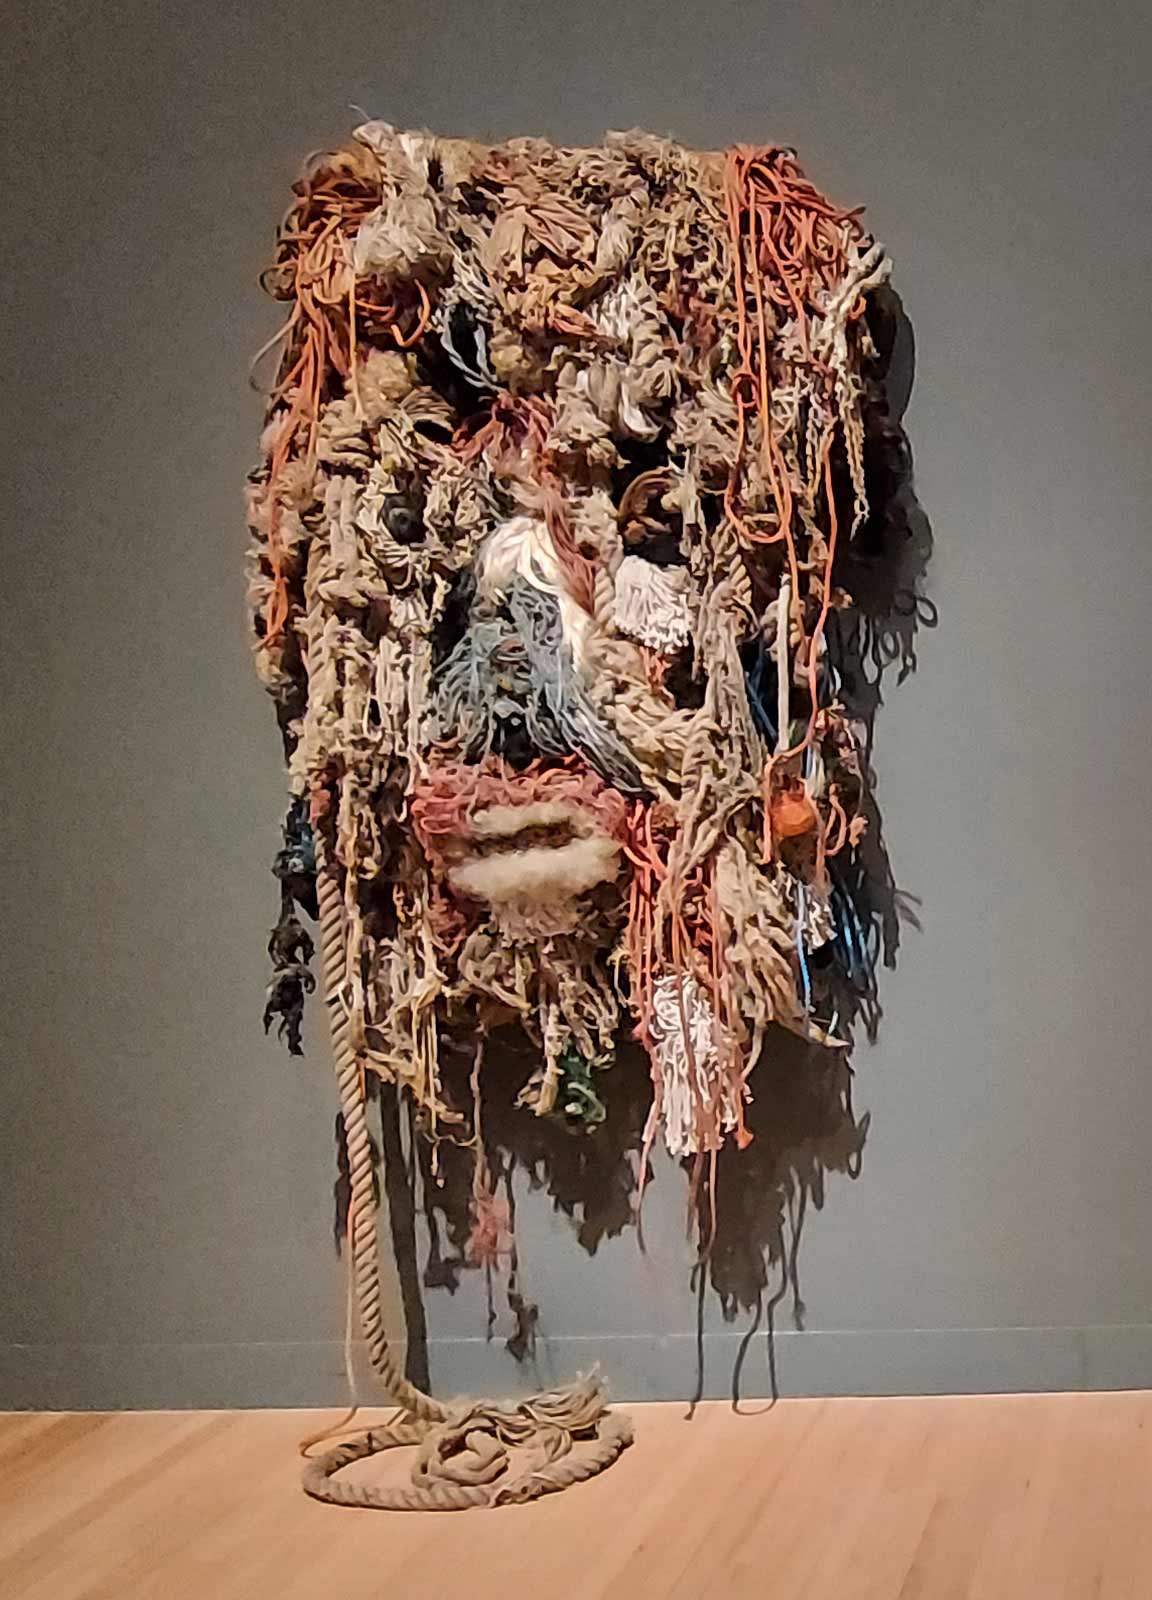 woven multi-coloured multi-weighted rope collage that looks like a bearded mythical face